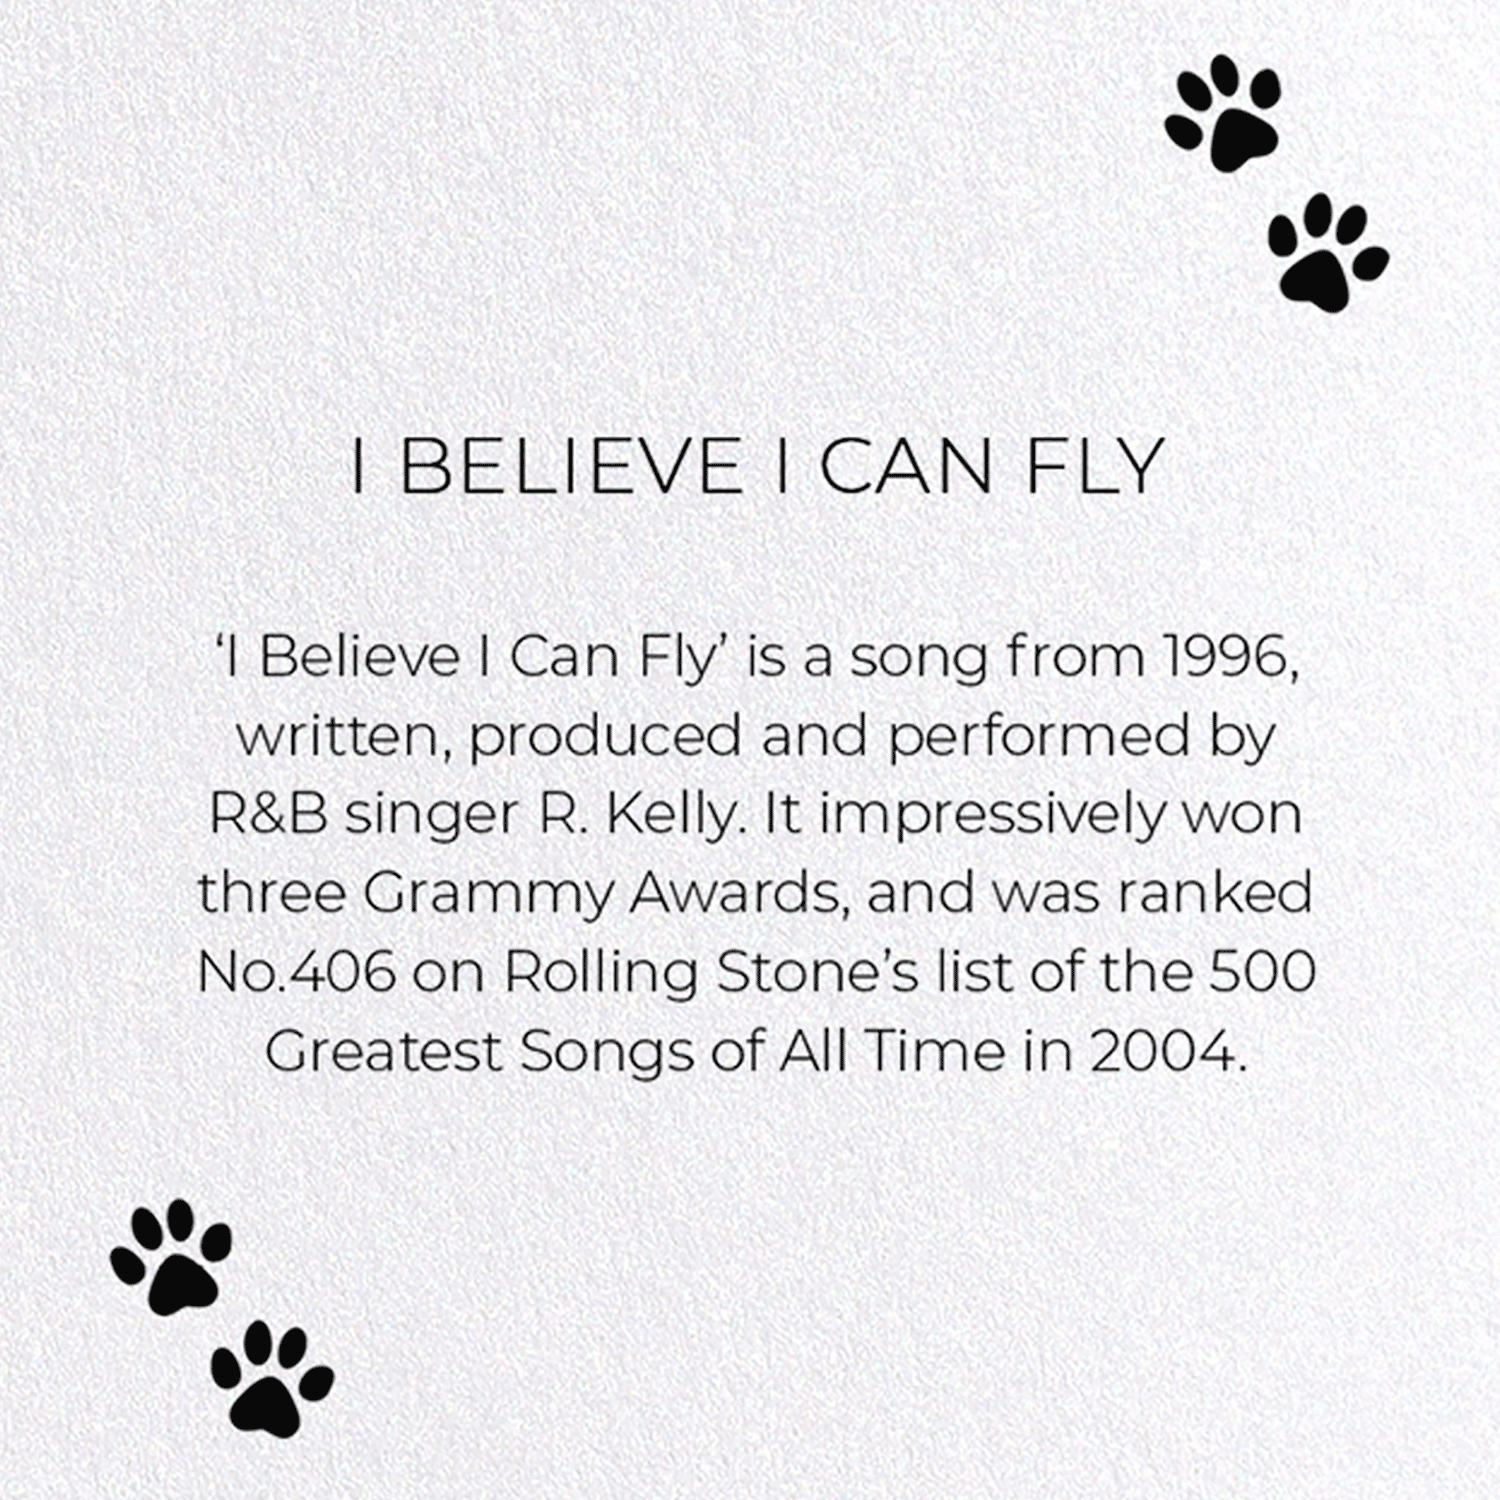 I BELIEVE I CAN FLY: Funny Animal Greeting Card